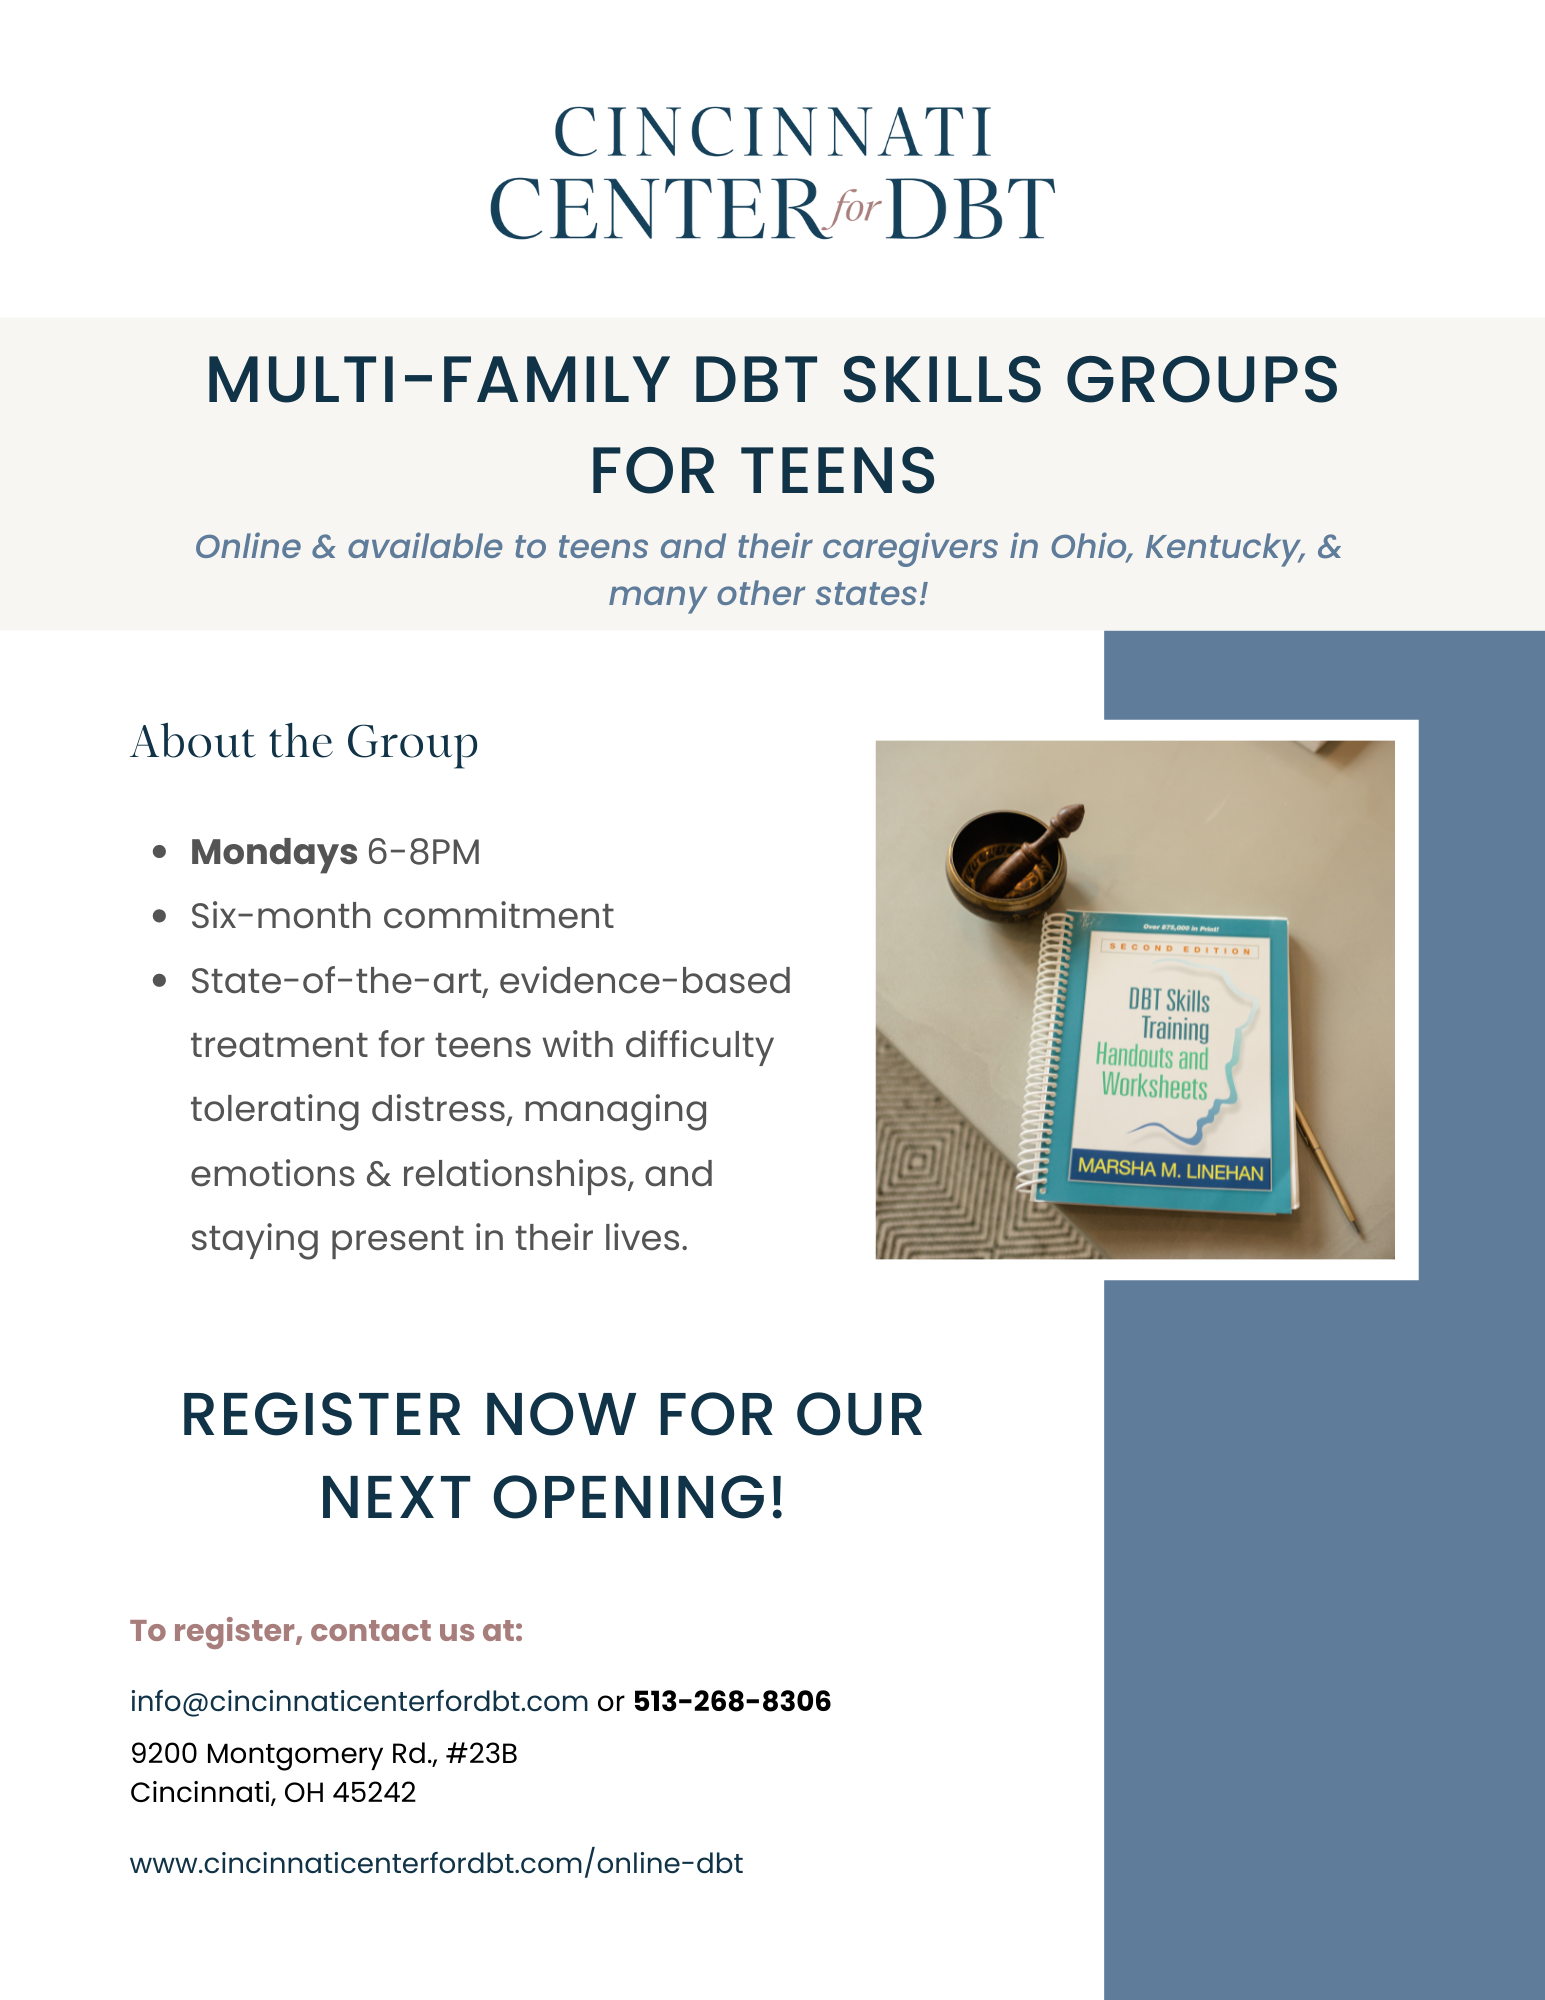 Flyer for Multi-family DBT skills training group for teens and their caregivers. Mondays 6-8PM online for Ohio, Kentucky, and PSYPACT state residents.